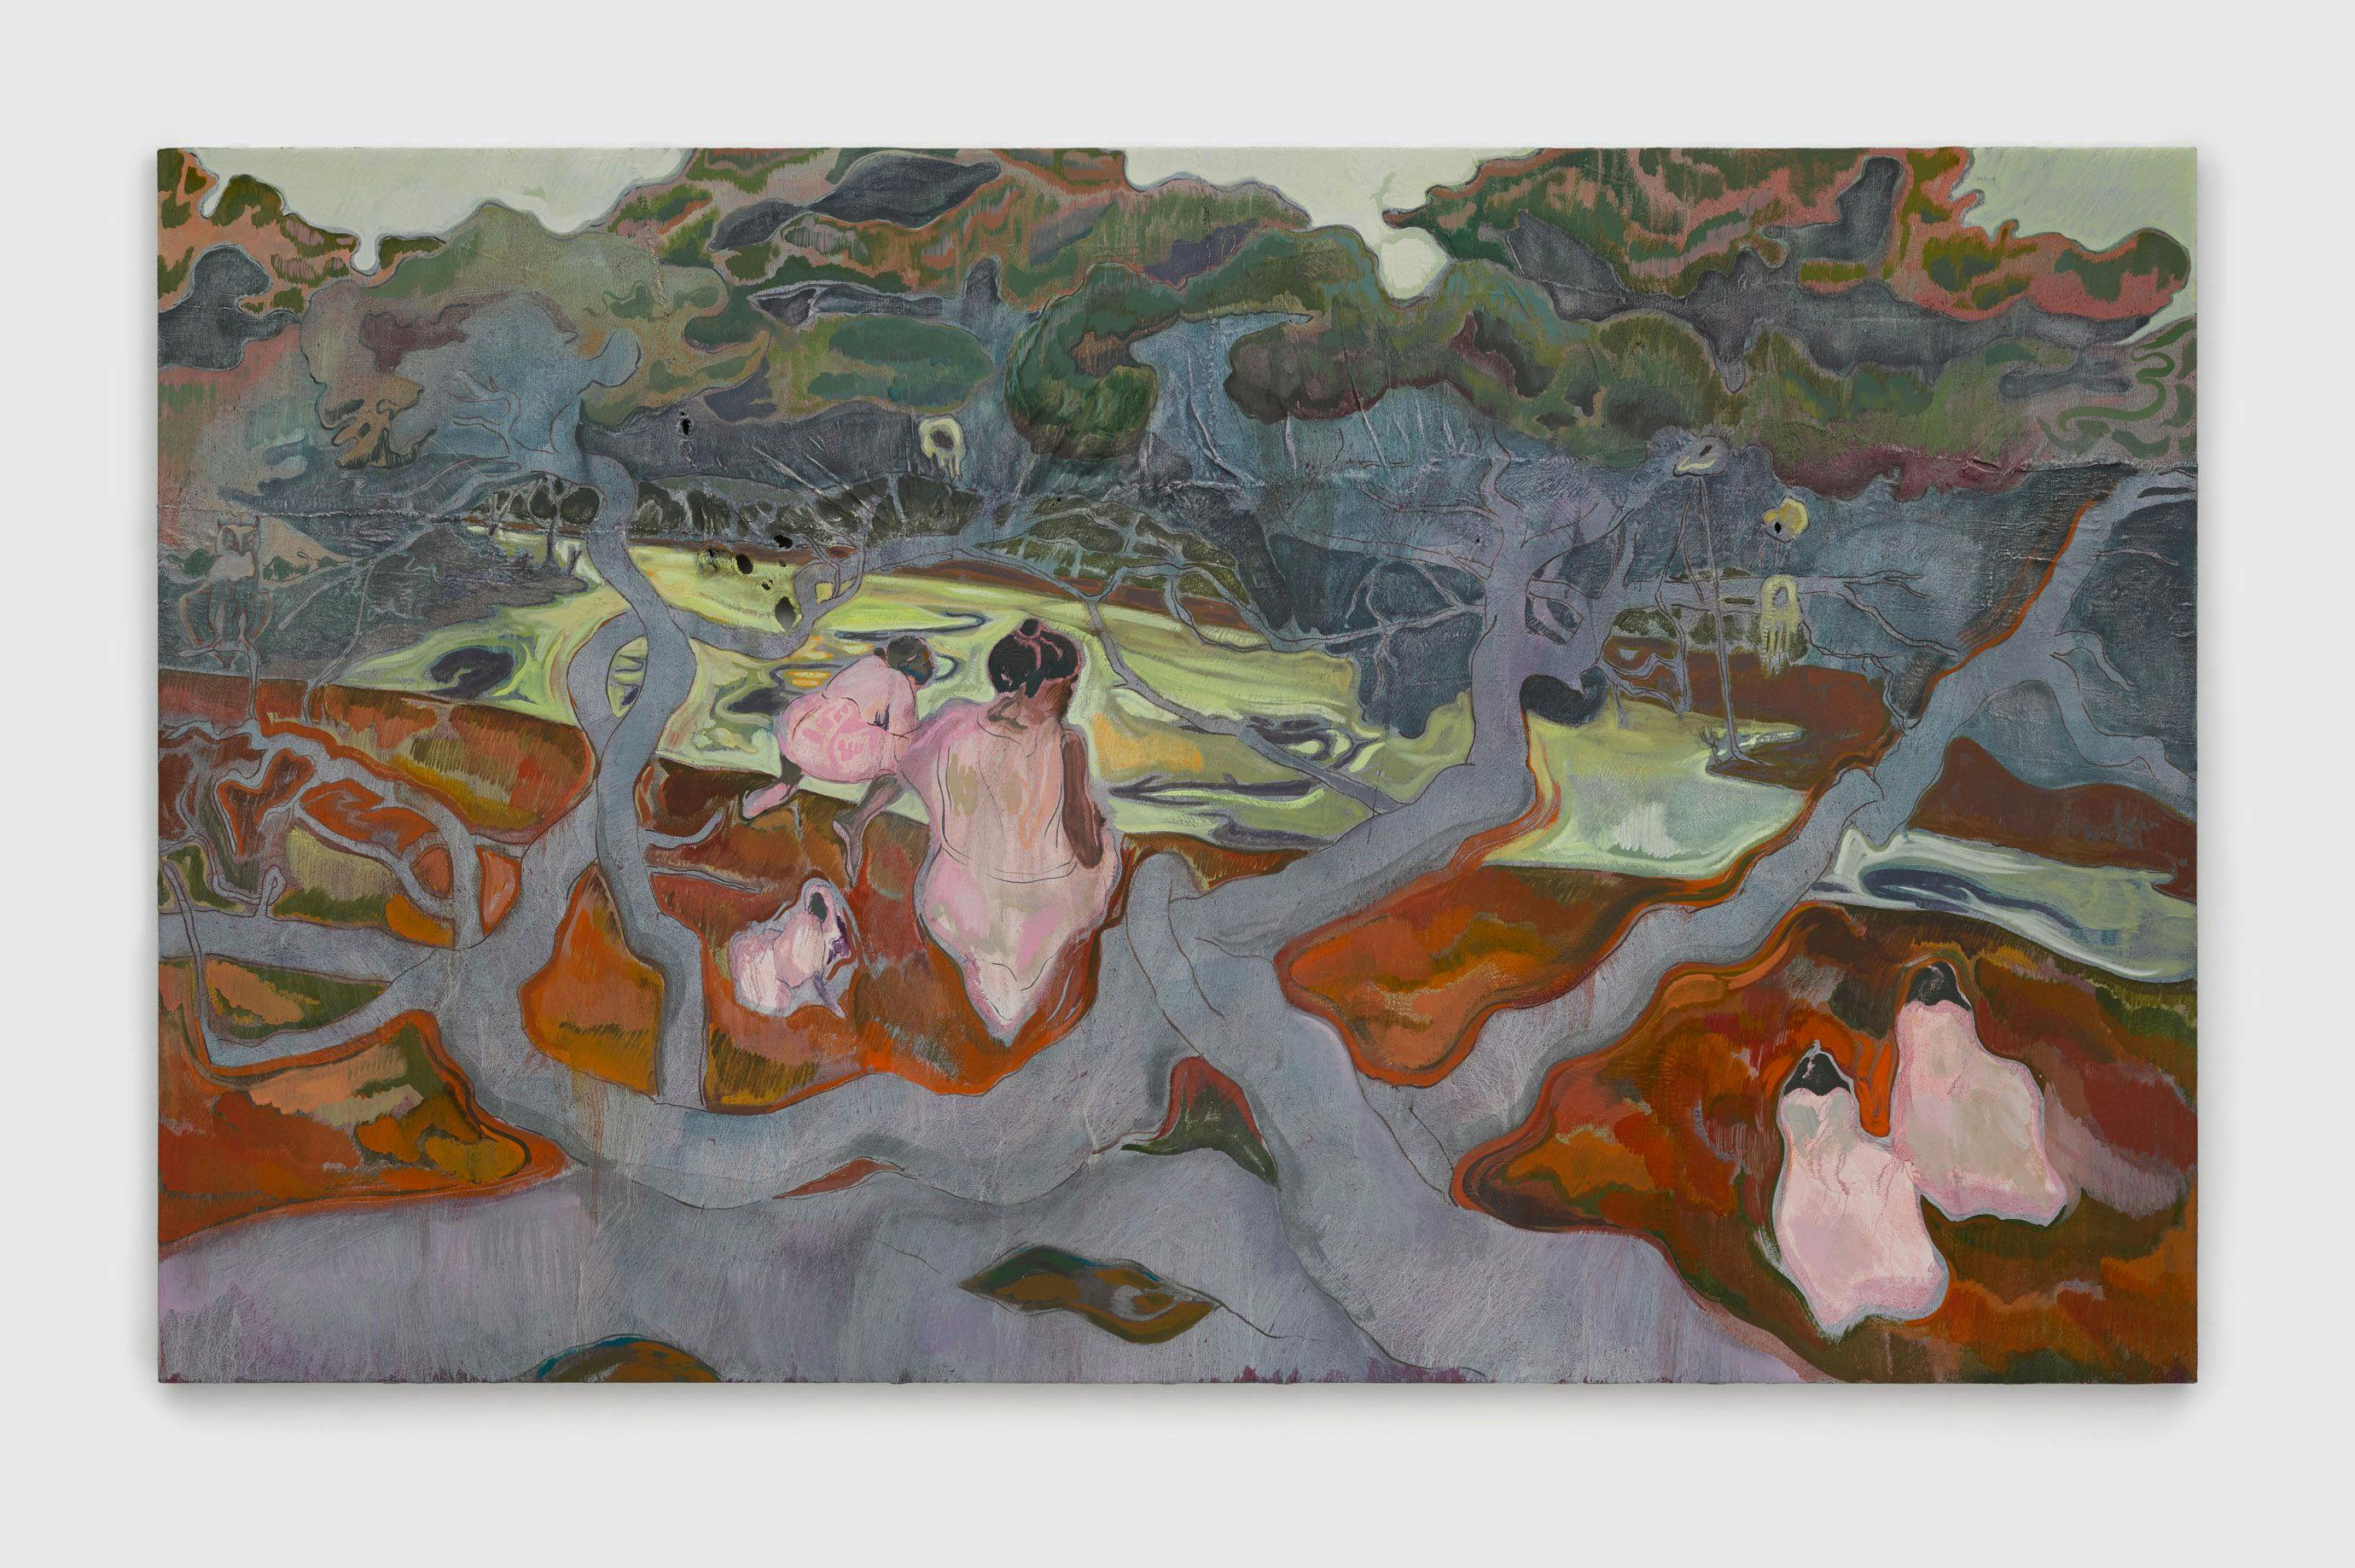 A painting by Michael Armitage, titled Baikoko at the mouth of the Mwachema River, dated 2016.